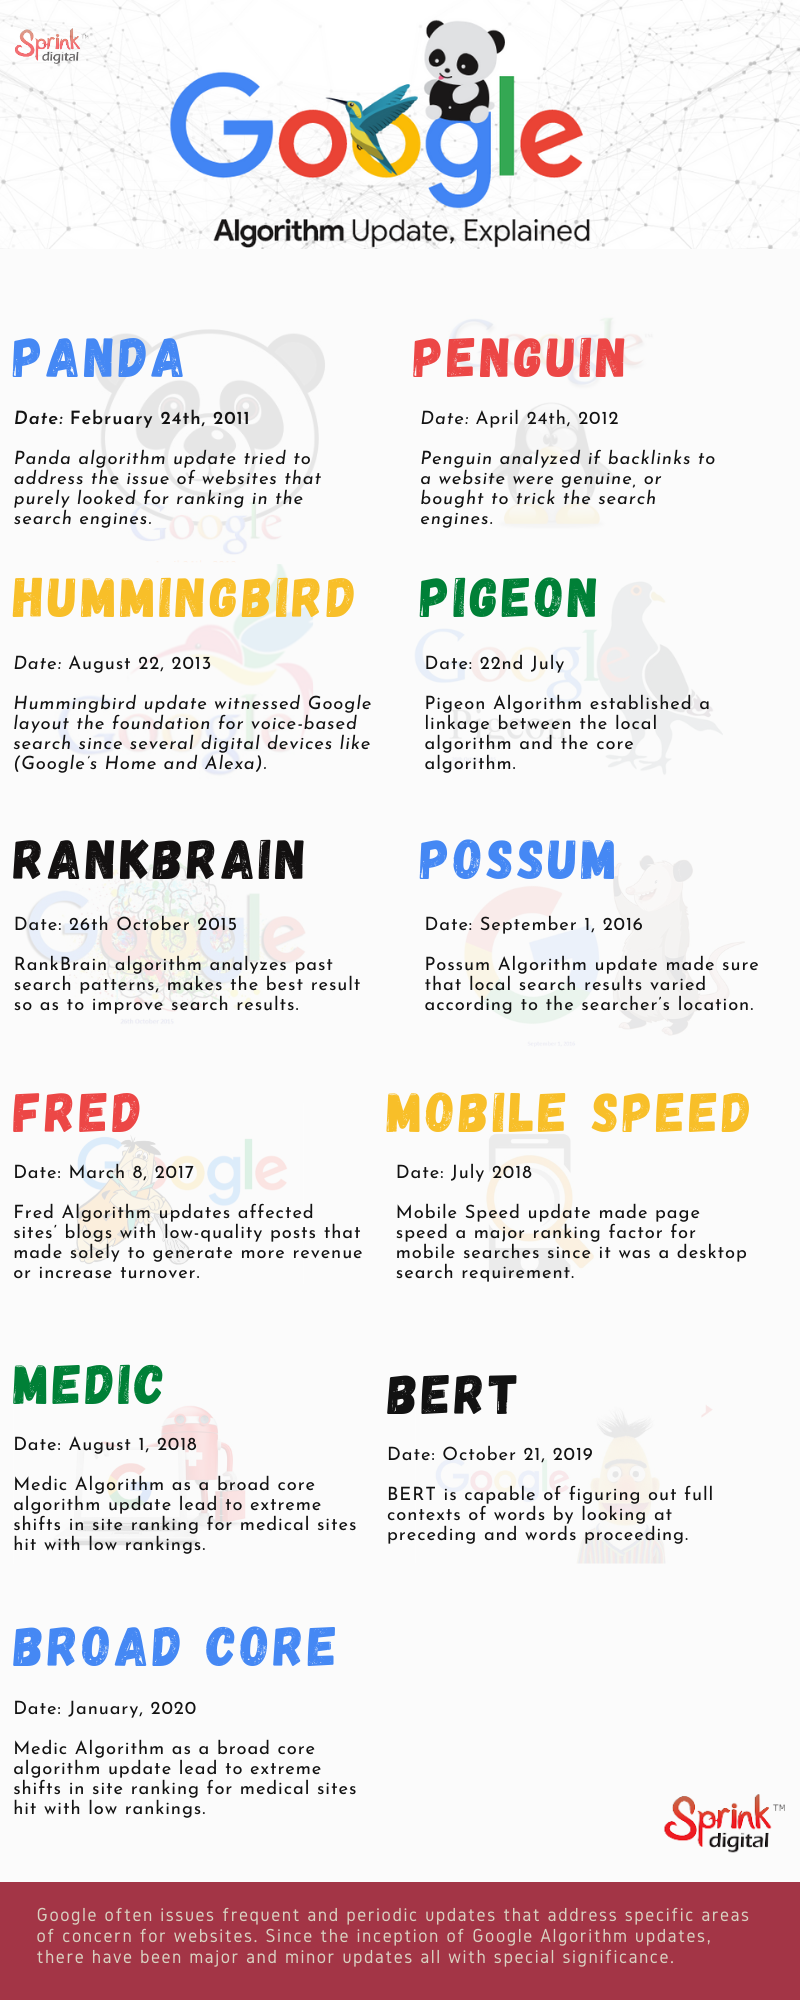 Major Google Algorithm Updates.png Google’s algorithms are adapted to get data from its search index and quickly give the best matching results for search queries. by digitalsprink